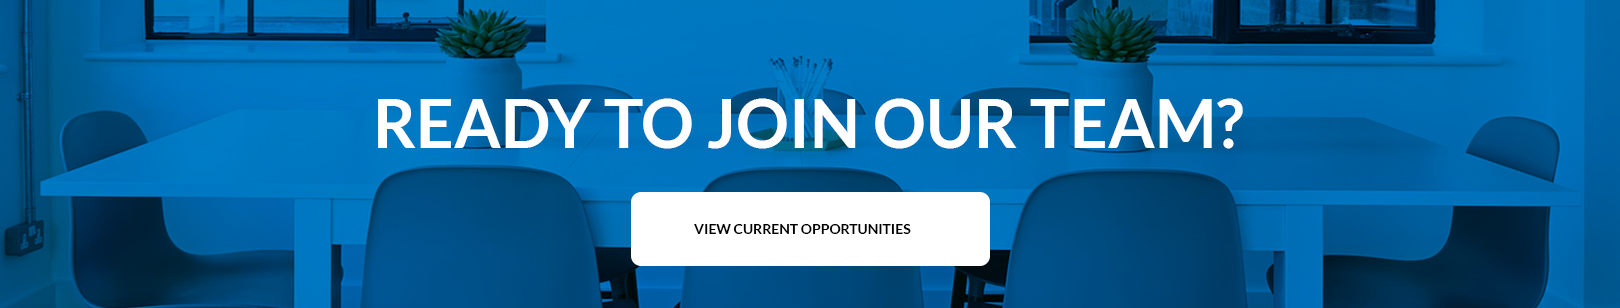 Ready to join our team? View current opportunities